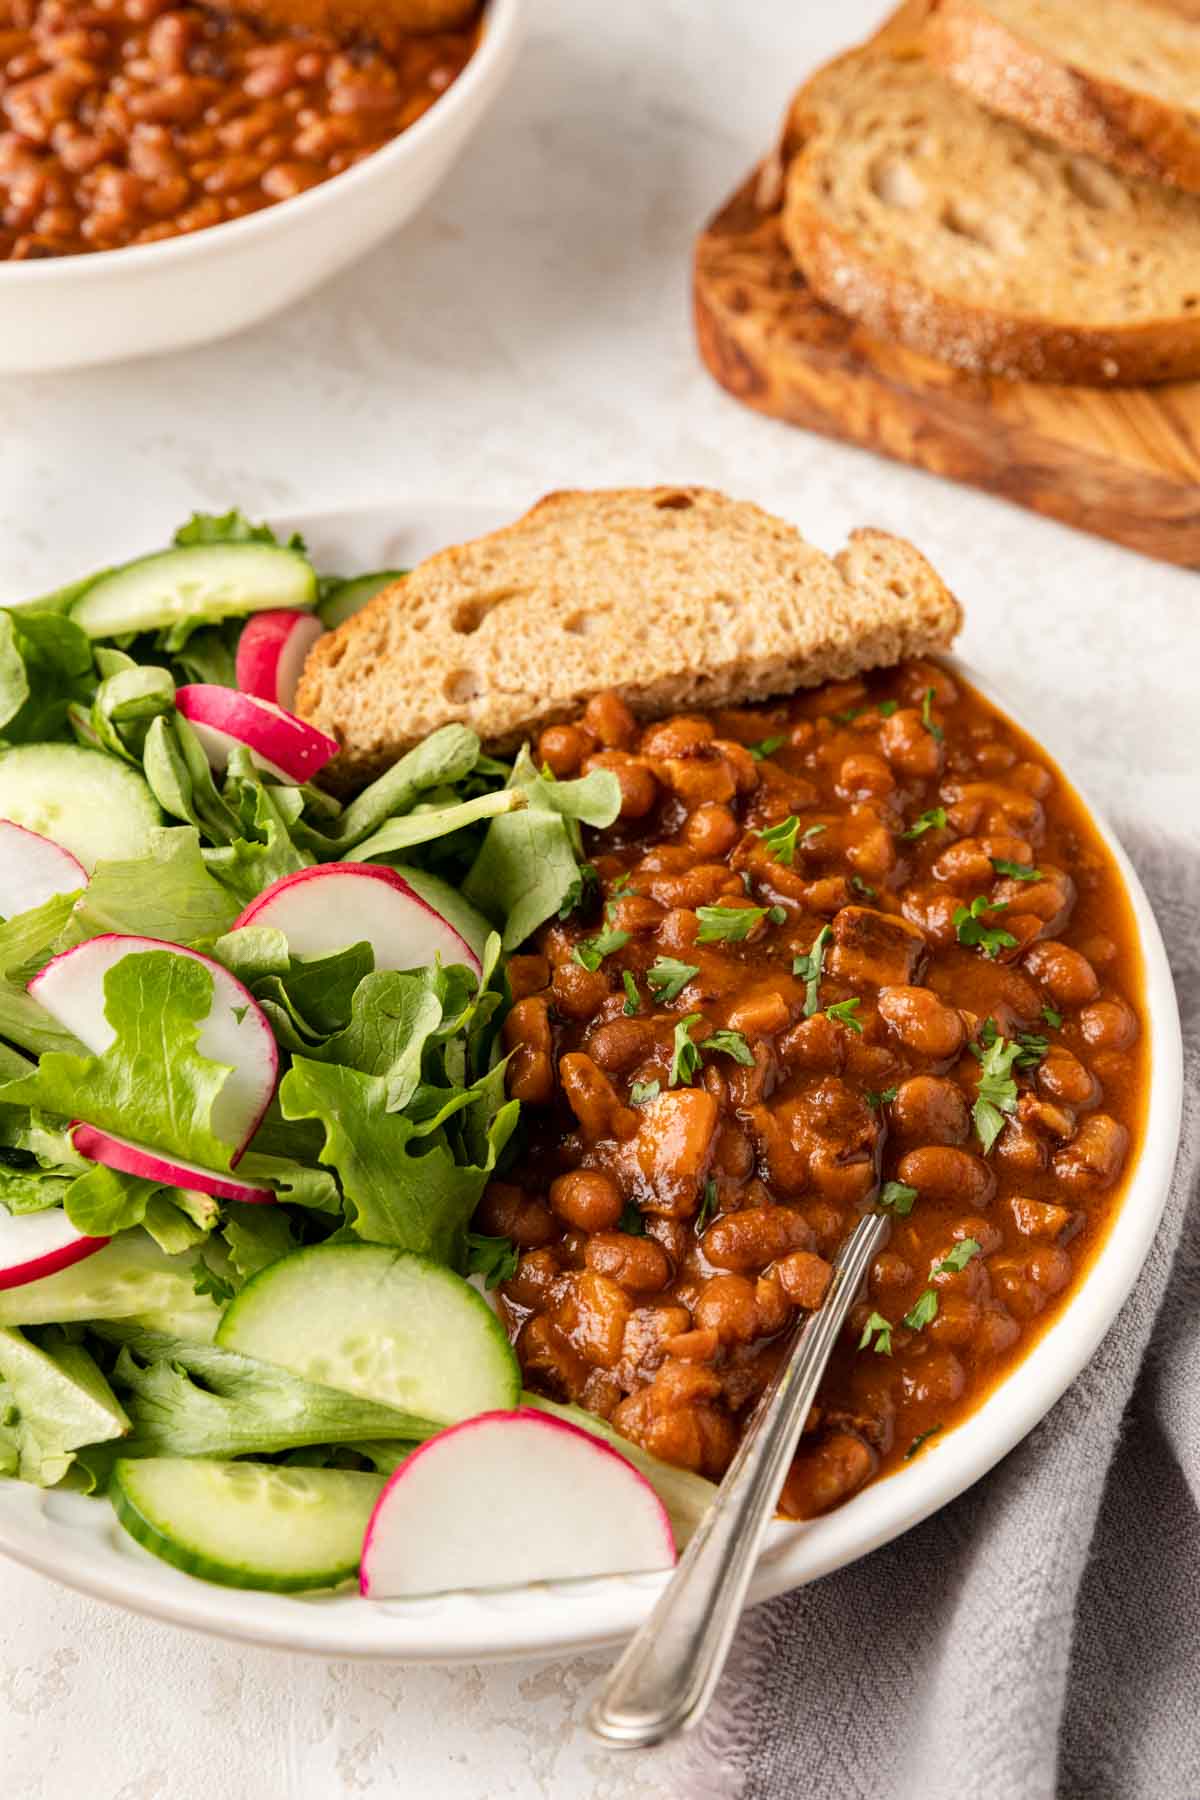 Slow Cooker Pork and Beans on plate with salad and bread